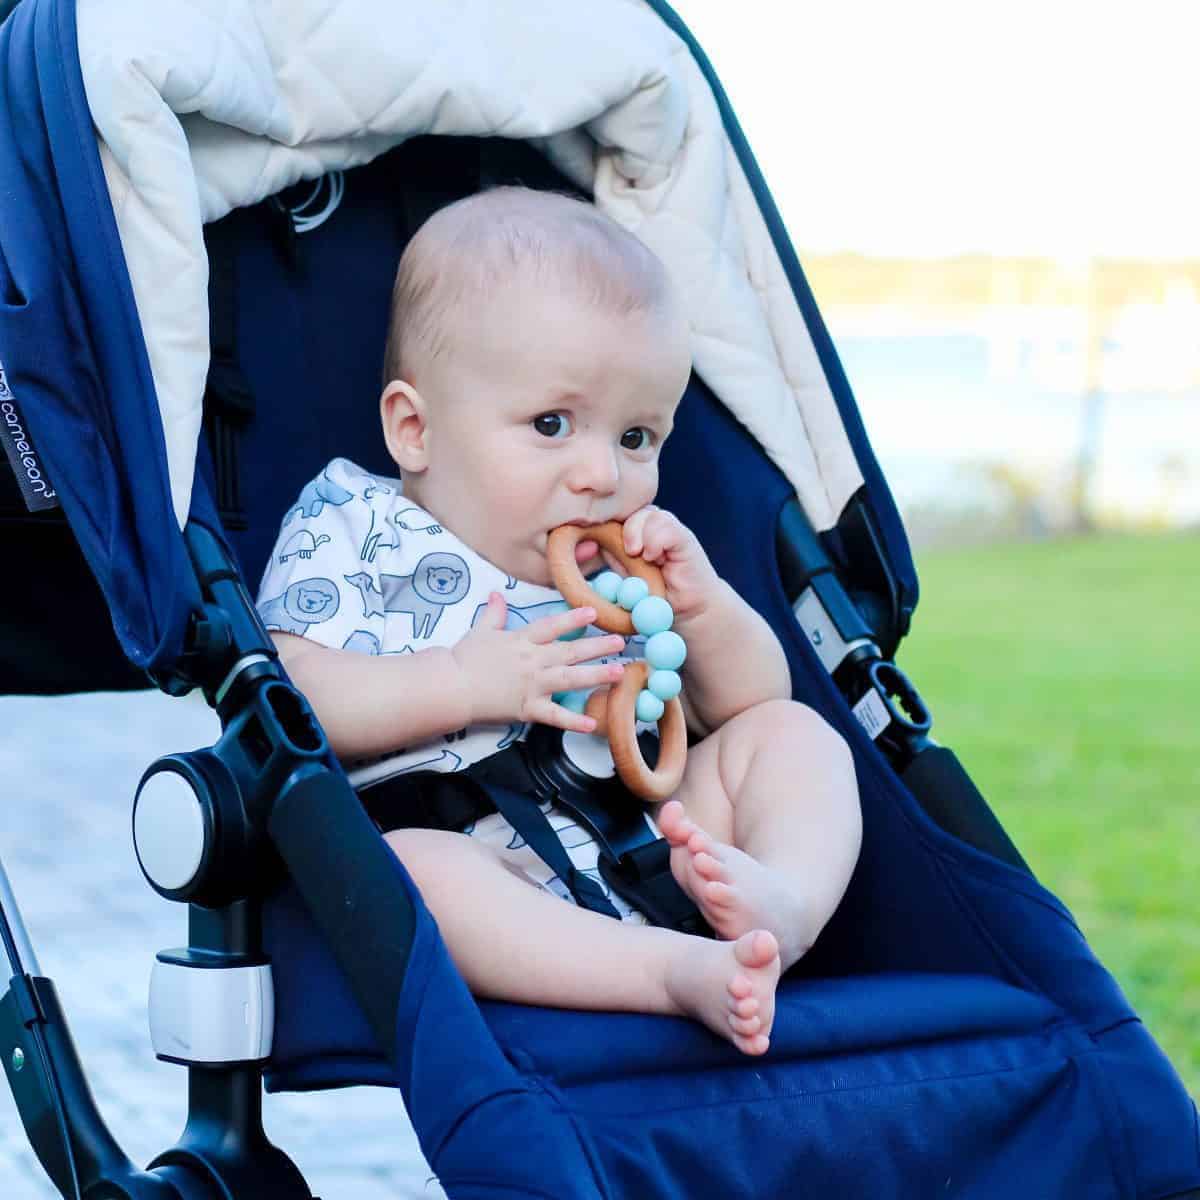 The Safe Teether Guide